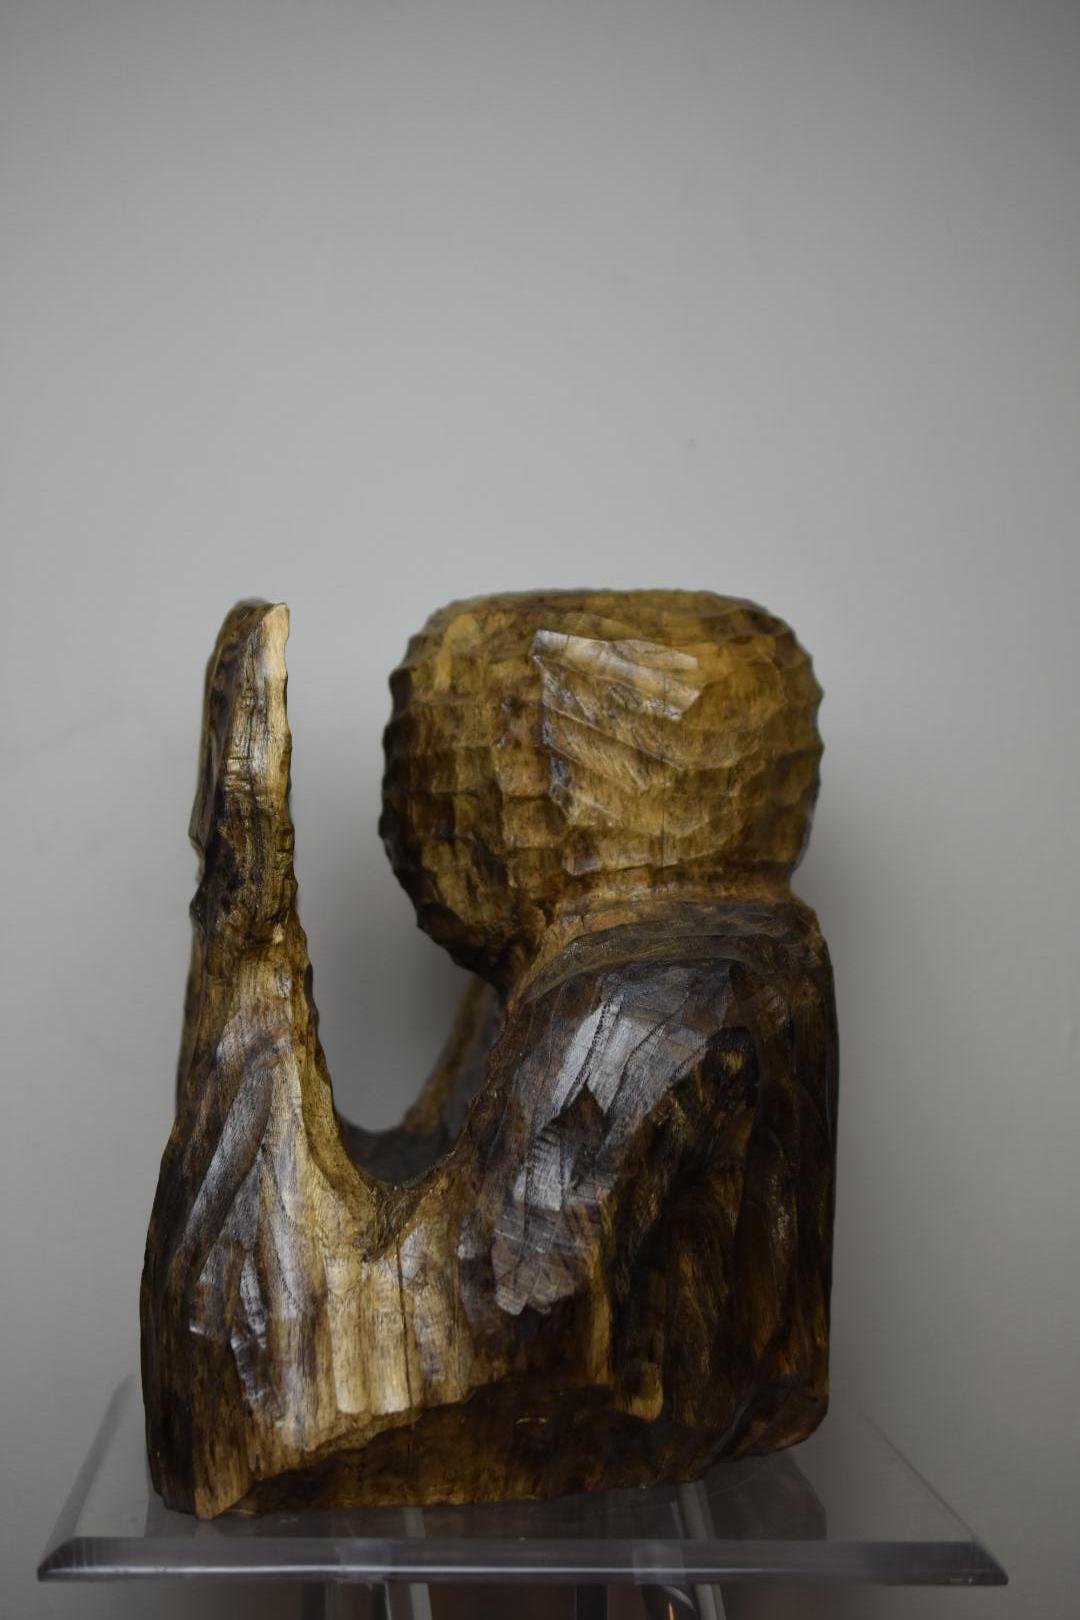 Original hand carved sculpture of person holding their hands in front of their face. Carved from solid ailanthus and allowed to naturally spalt for black coloring. Done in a minimal and primitive style, carved by hand with gouges. Coated in a very